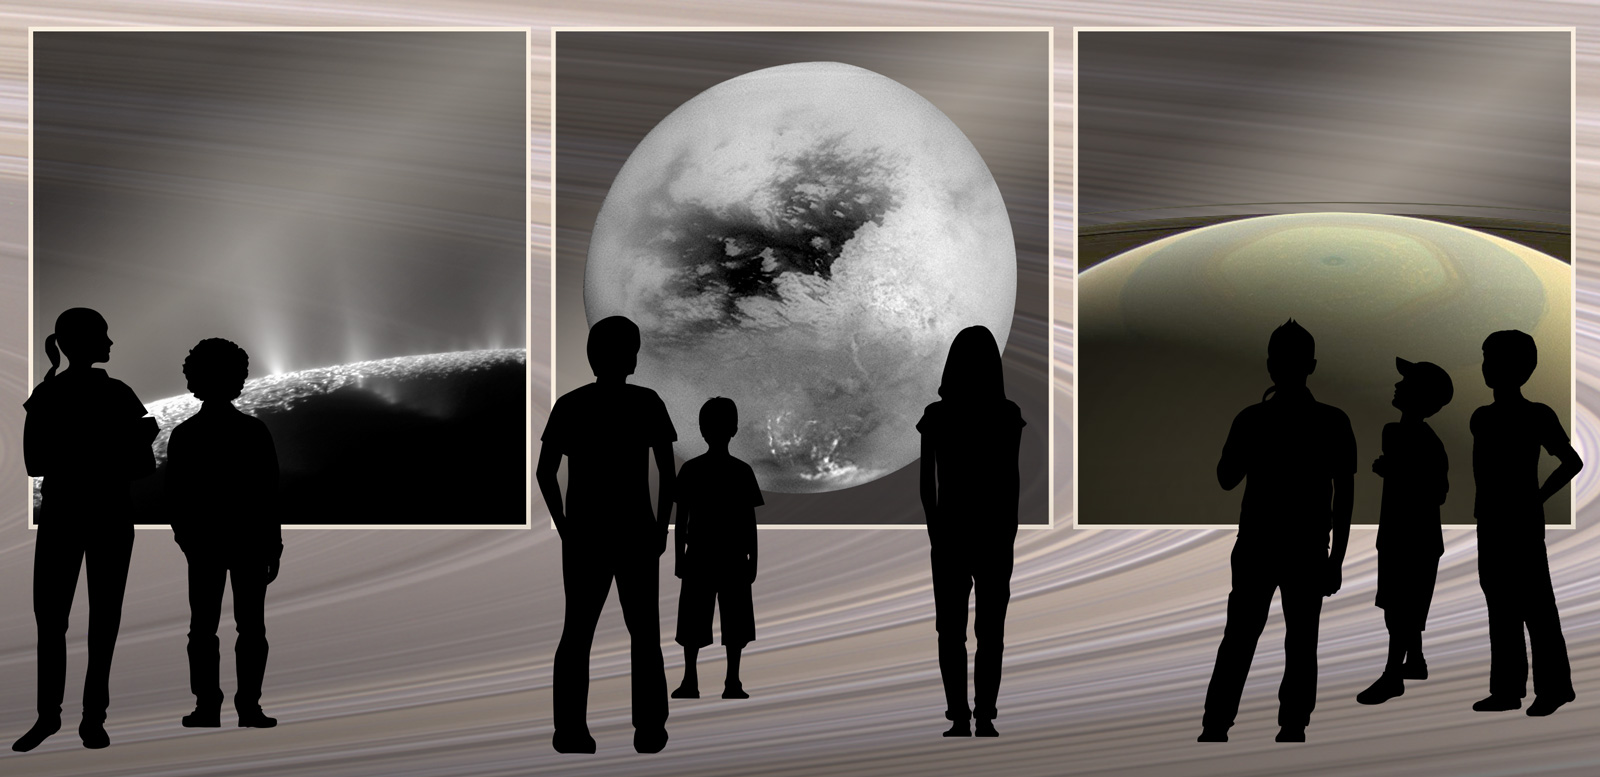 Montage of images from NASA's Cassini spacecraft